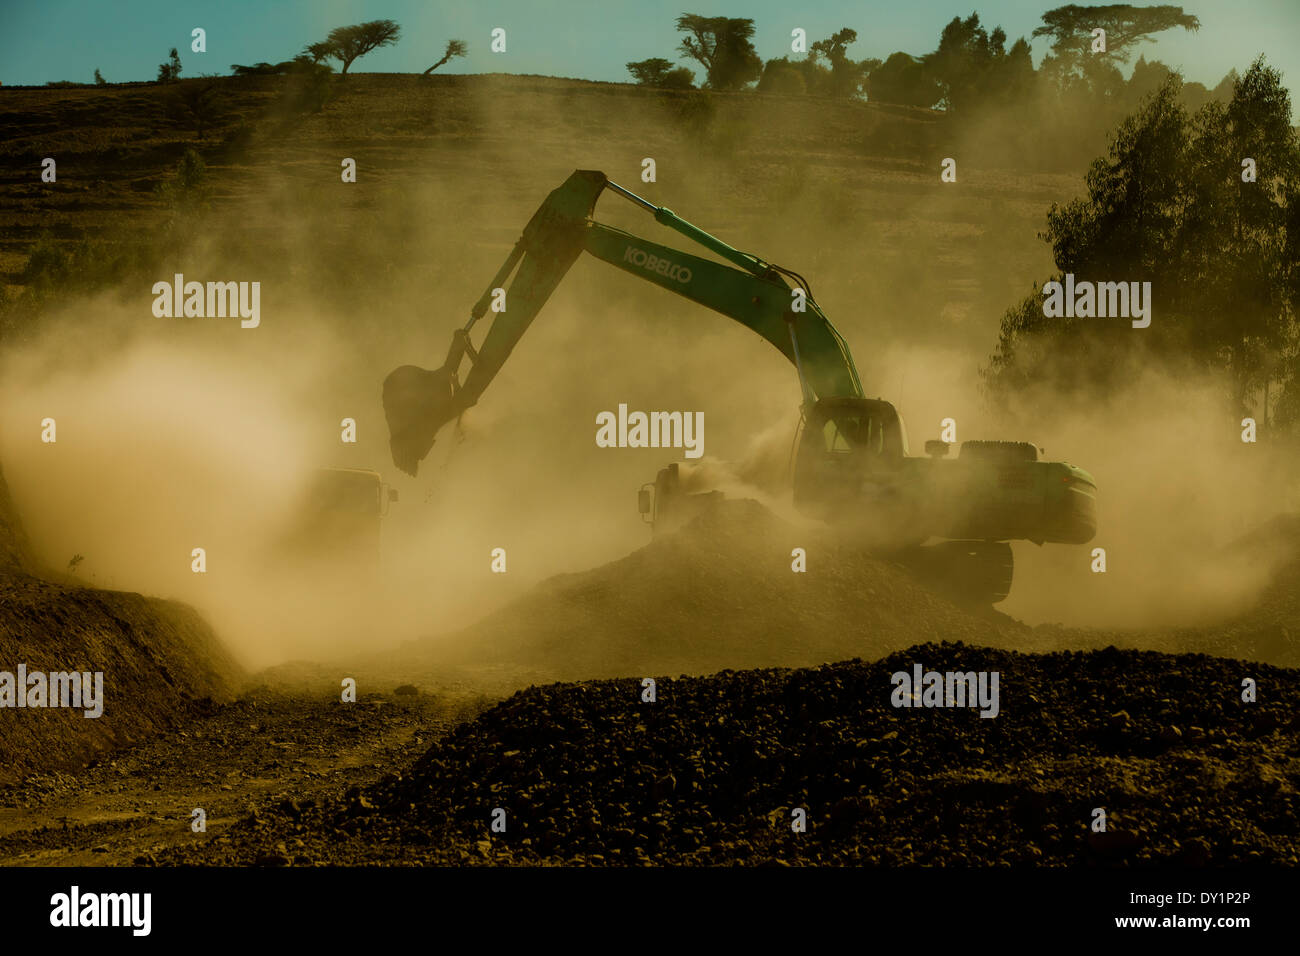 African dusty road digger Crane construction Stock Photo